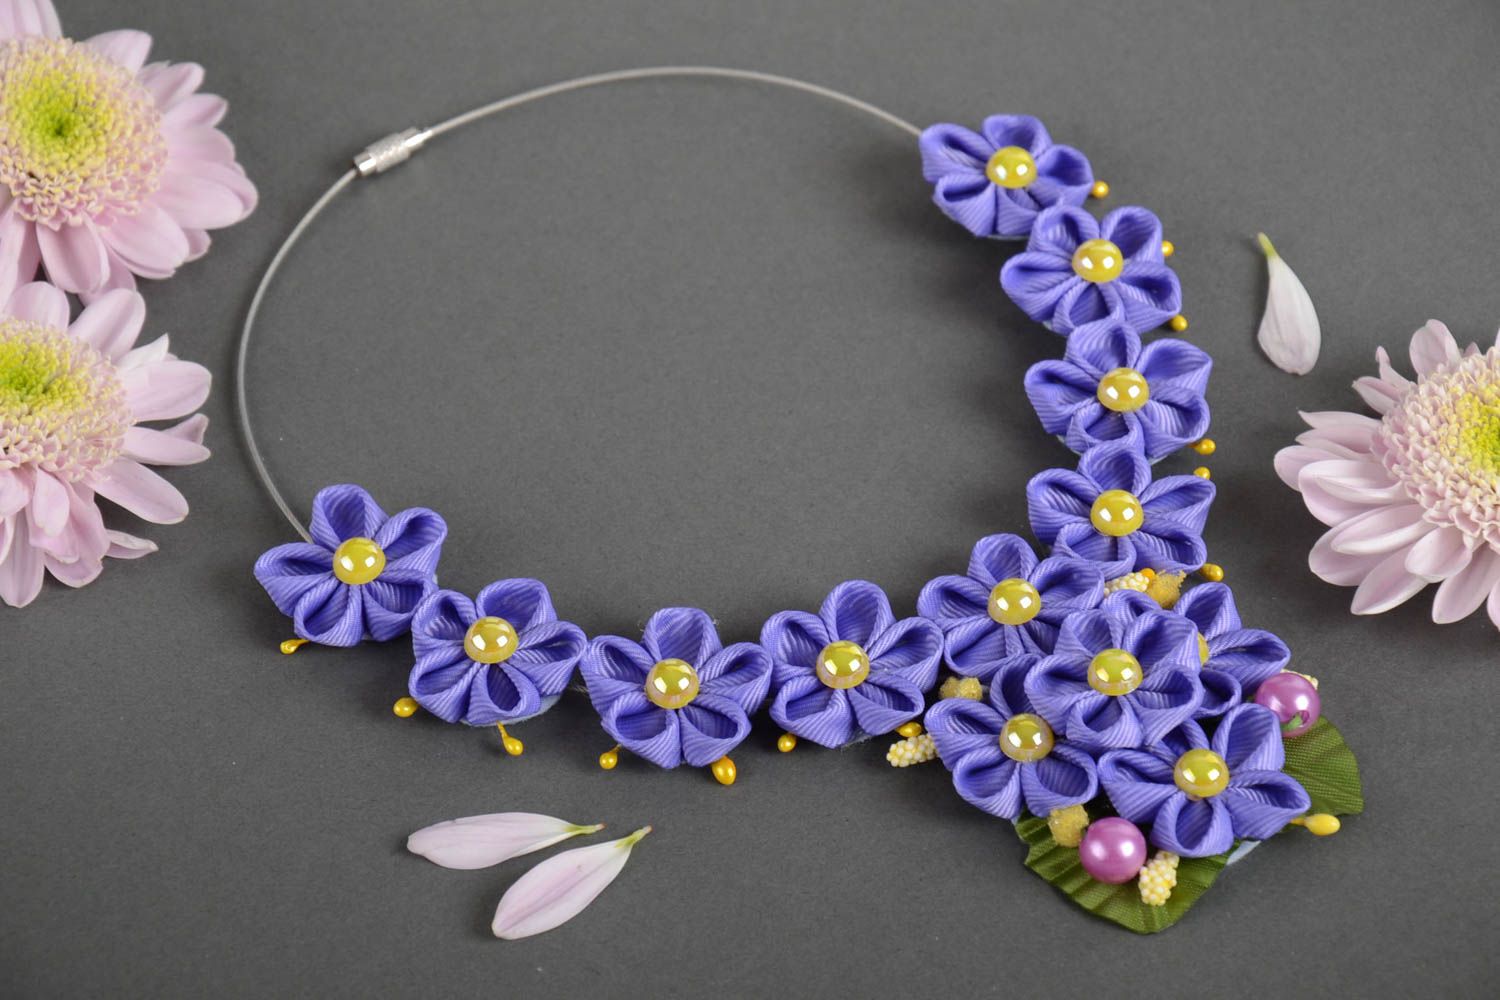 Handmade designer necklace with violet rep ribbon kanzashi flowers and beads photo 1